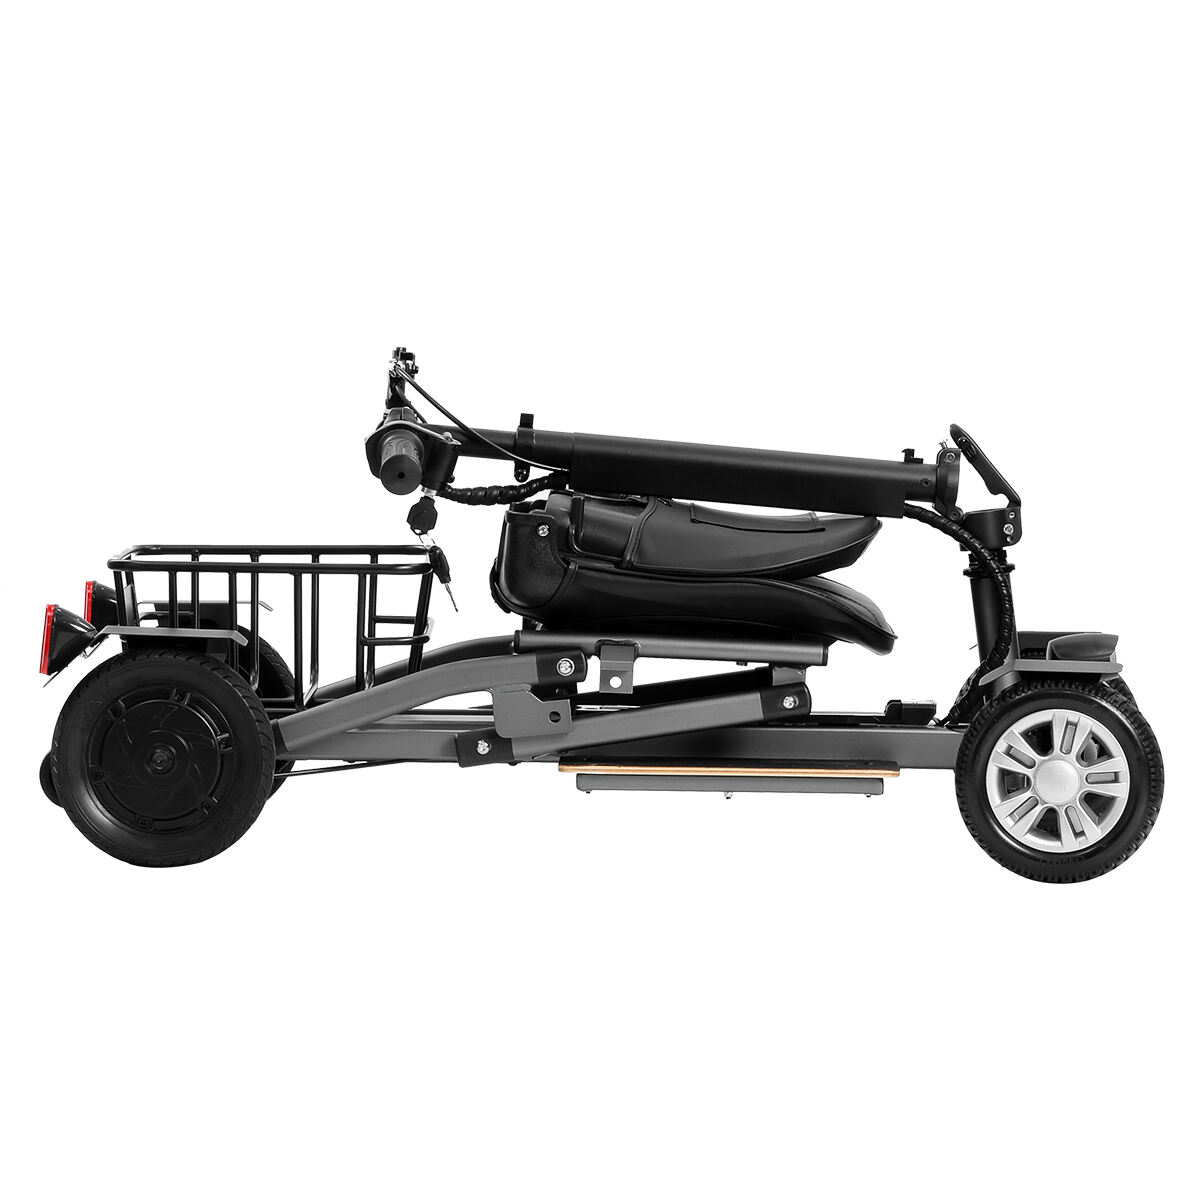 BC-MS310 Lightweight Portable Electric Mobility Scooter With Lithium Battery